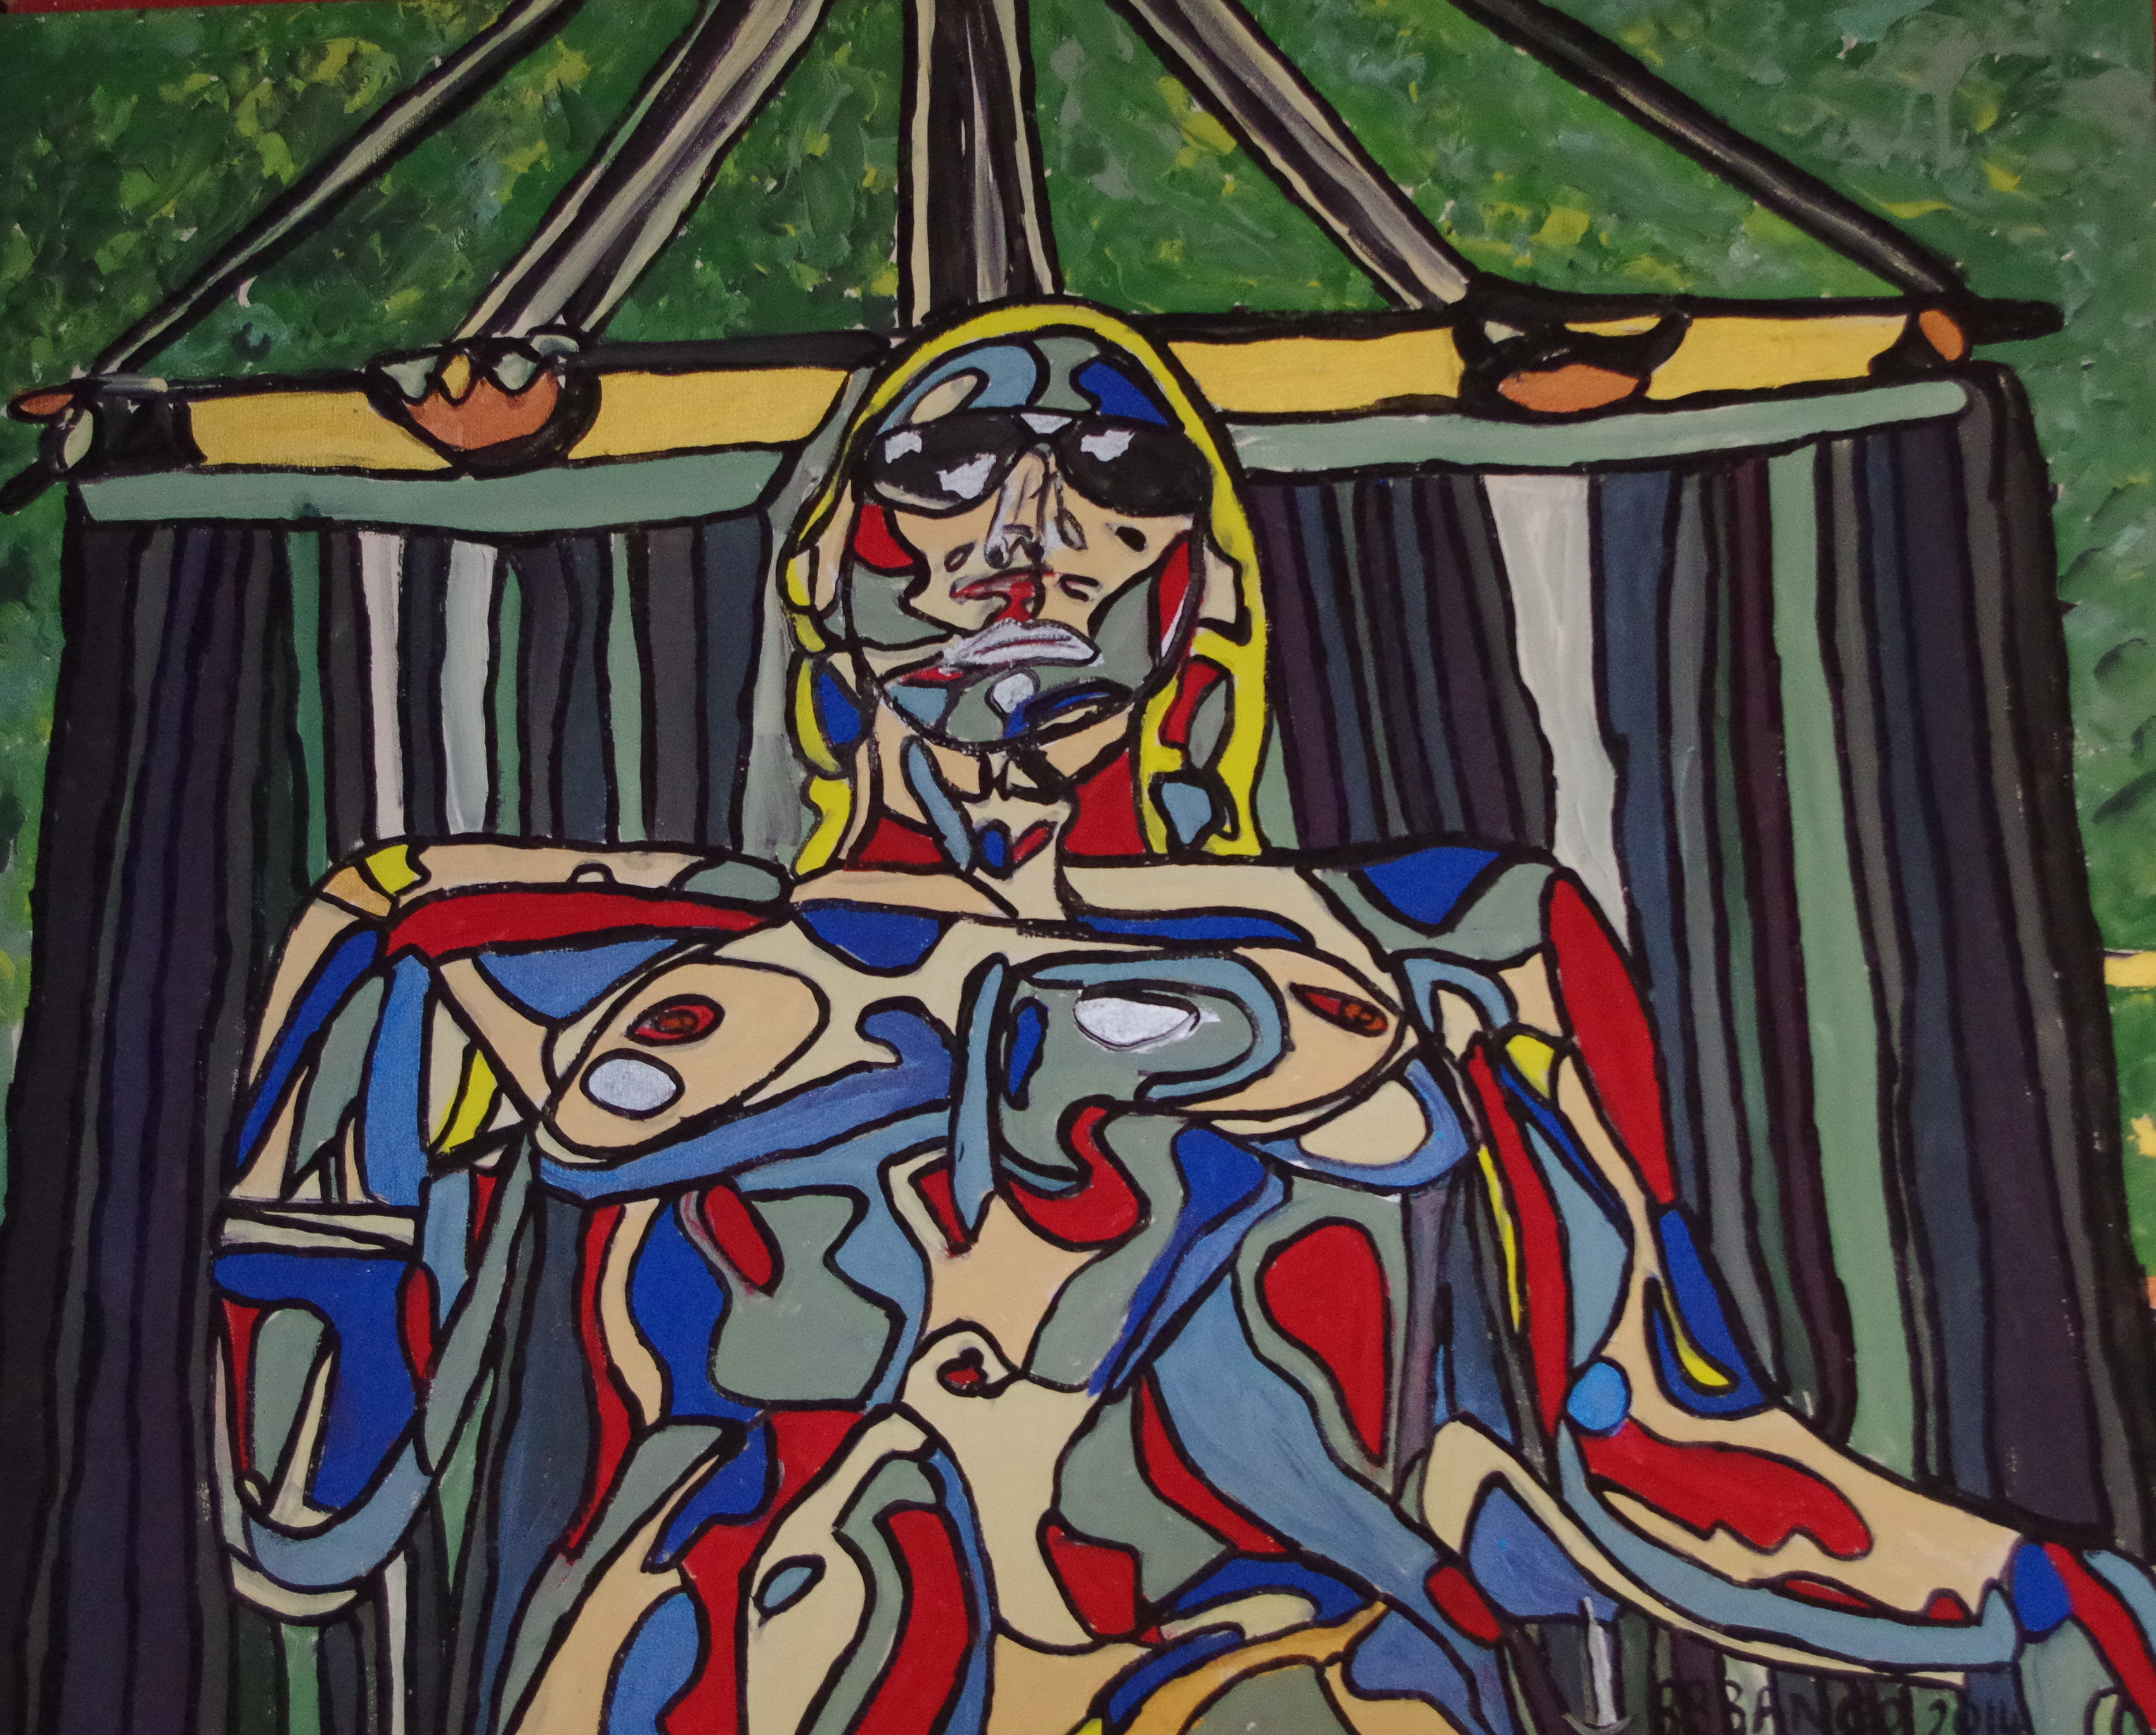 'Nude on a hammock' by BB Bango based 18 by 15 inch acrylic on canvas. Sold to art collector in UK